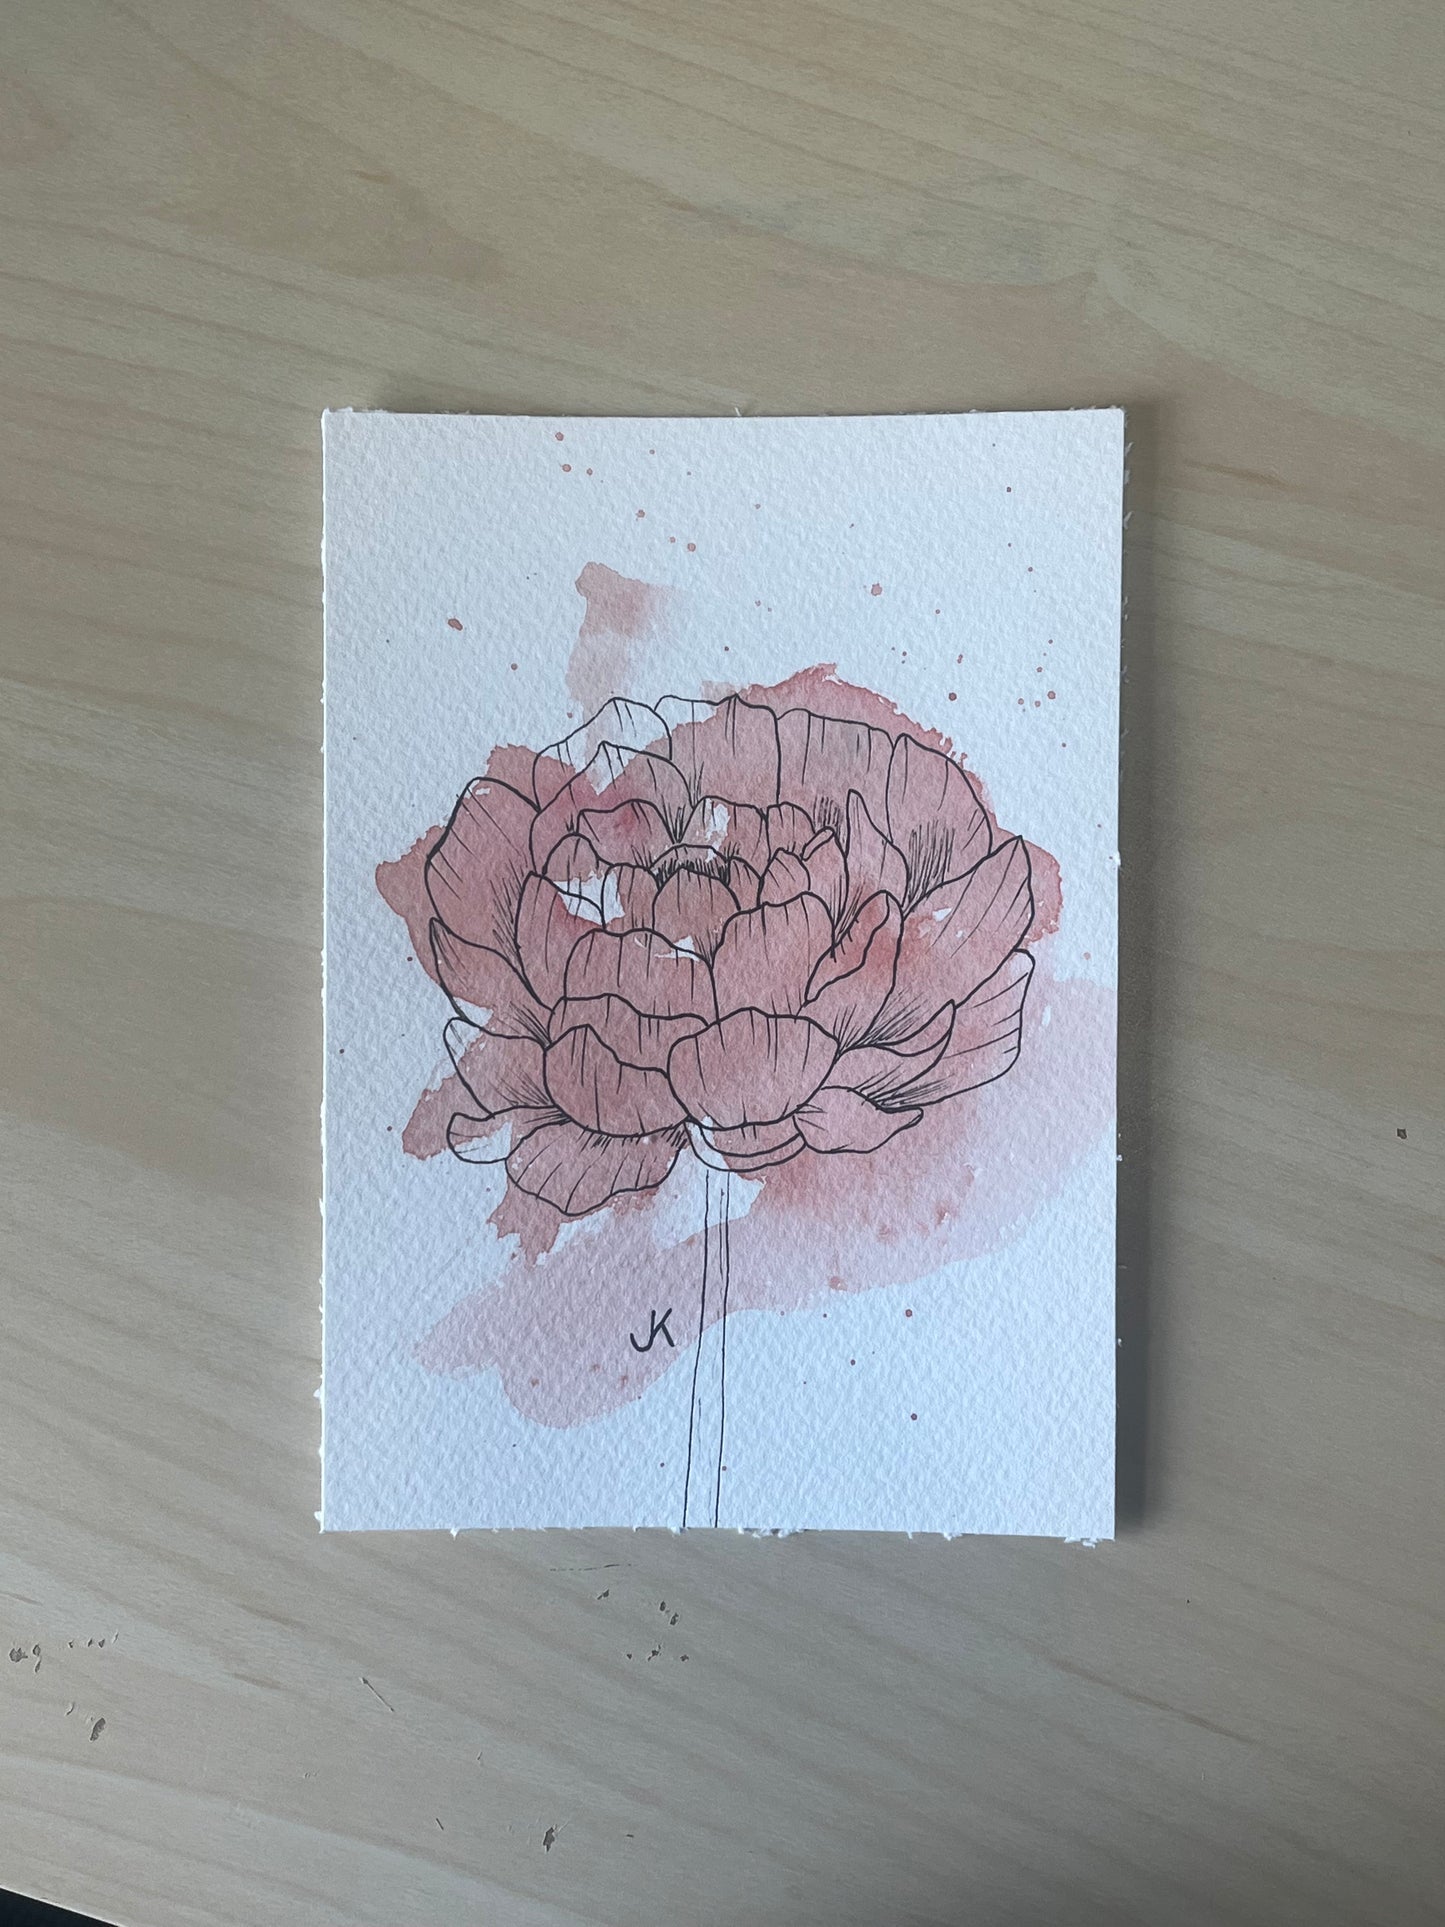 Floral Blush: Original watercolor painting and floral outline of a Peony bloom